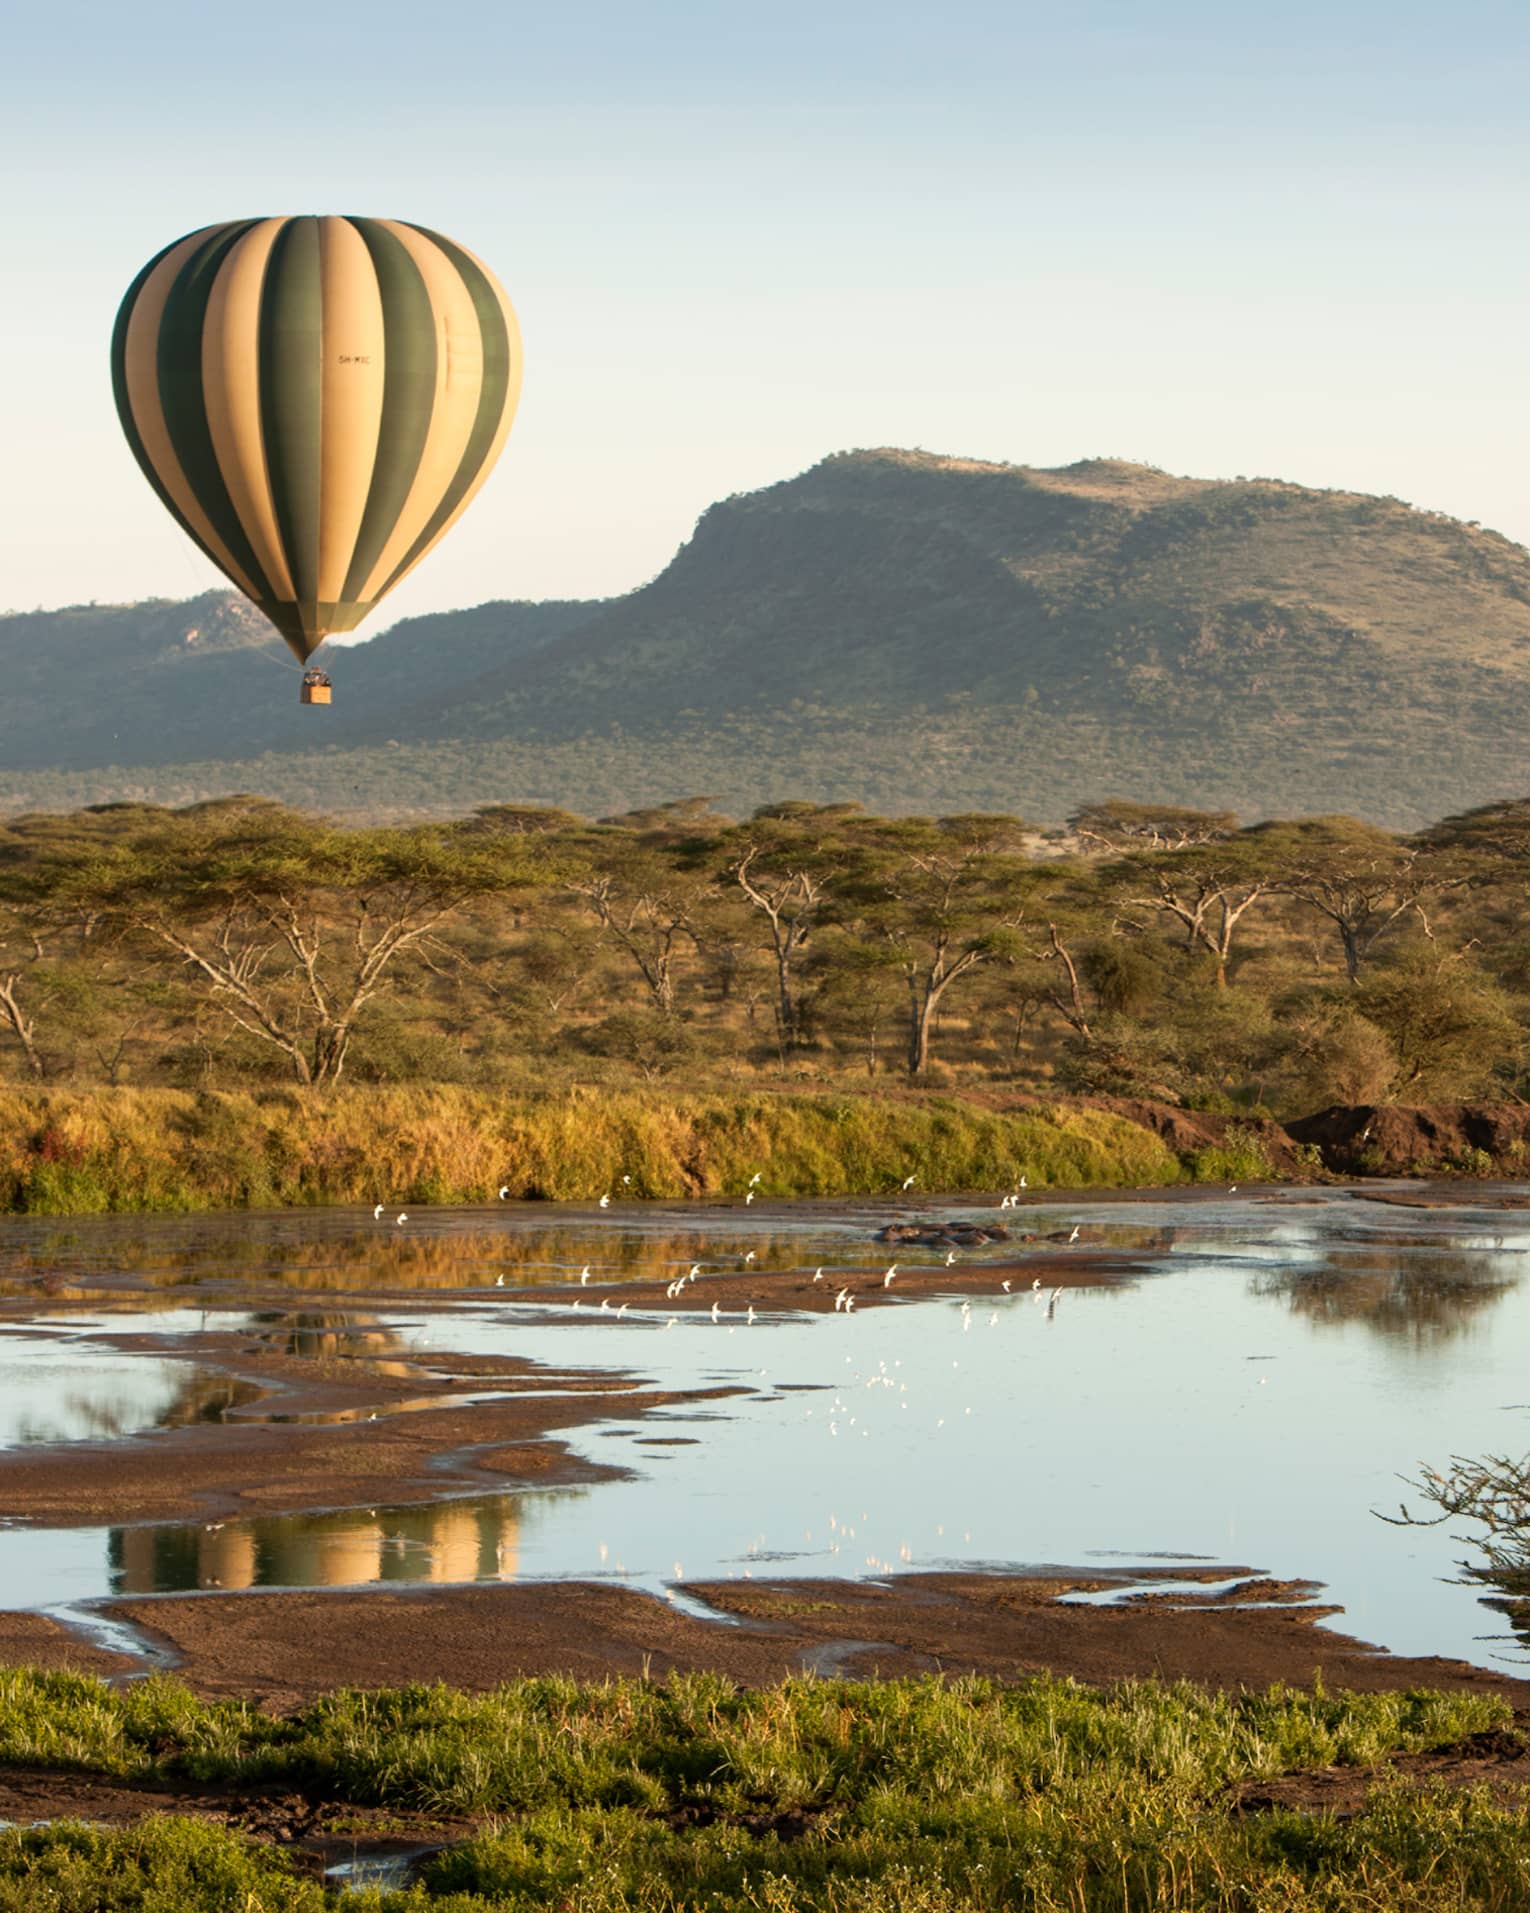 Striped hot air balloon floating over Serengeti fields, ponds